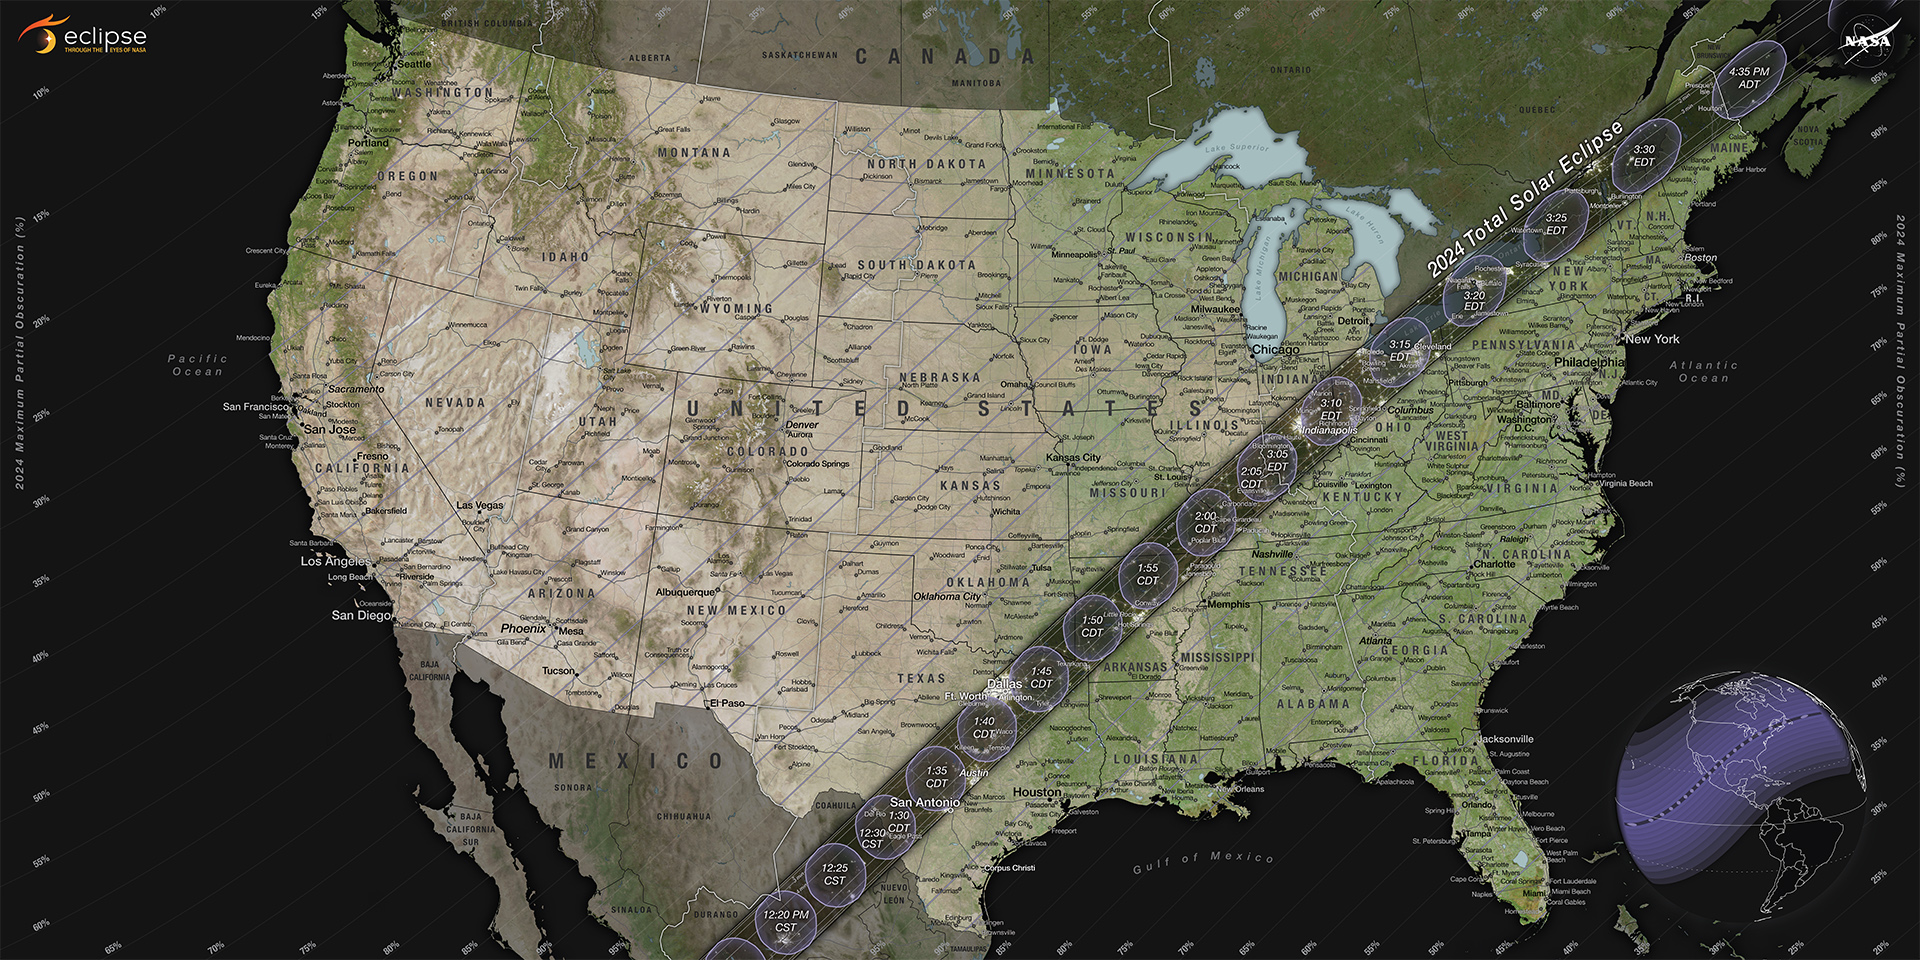 Map showing the expected path of totality and partial contours crossing the U.S. for the 2024 total solar eclipse occurring on April 8, 2024